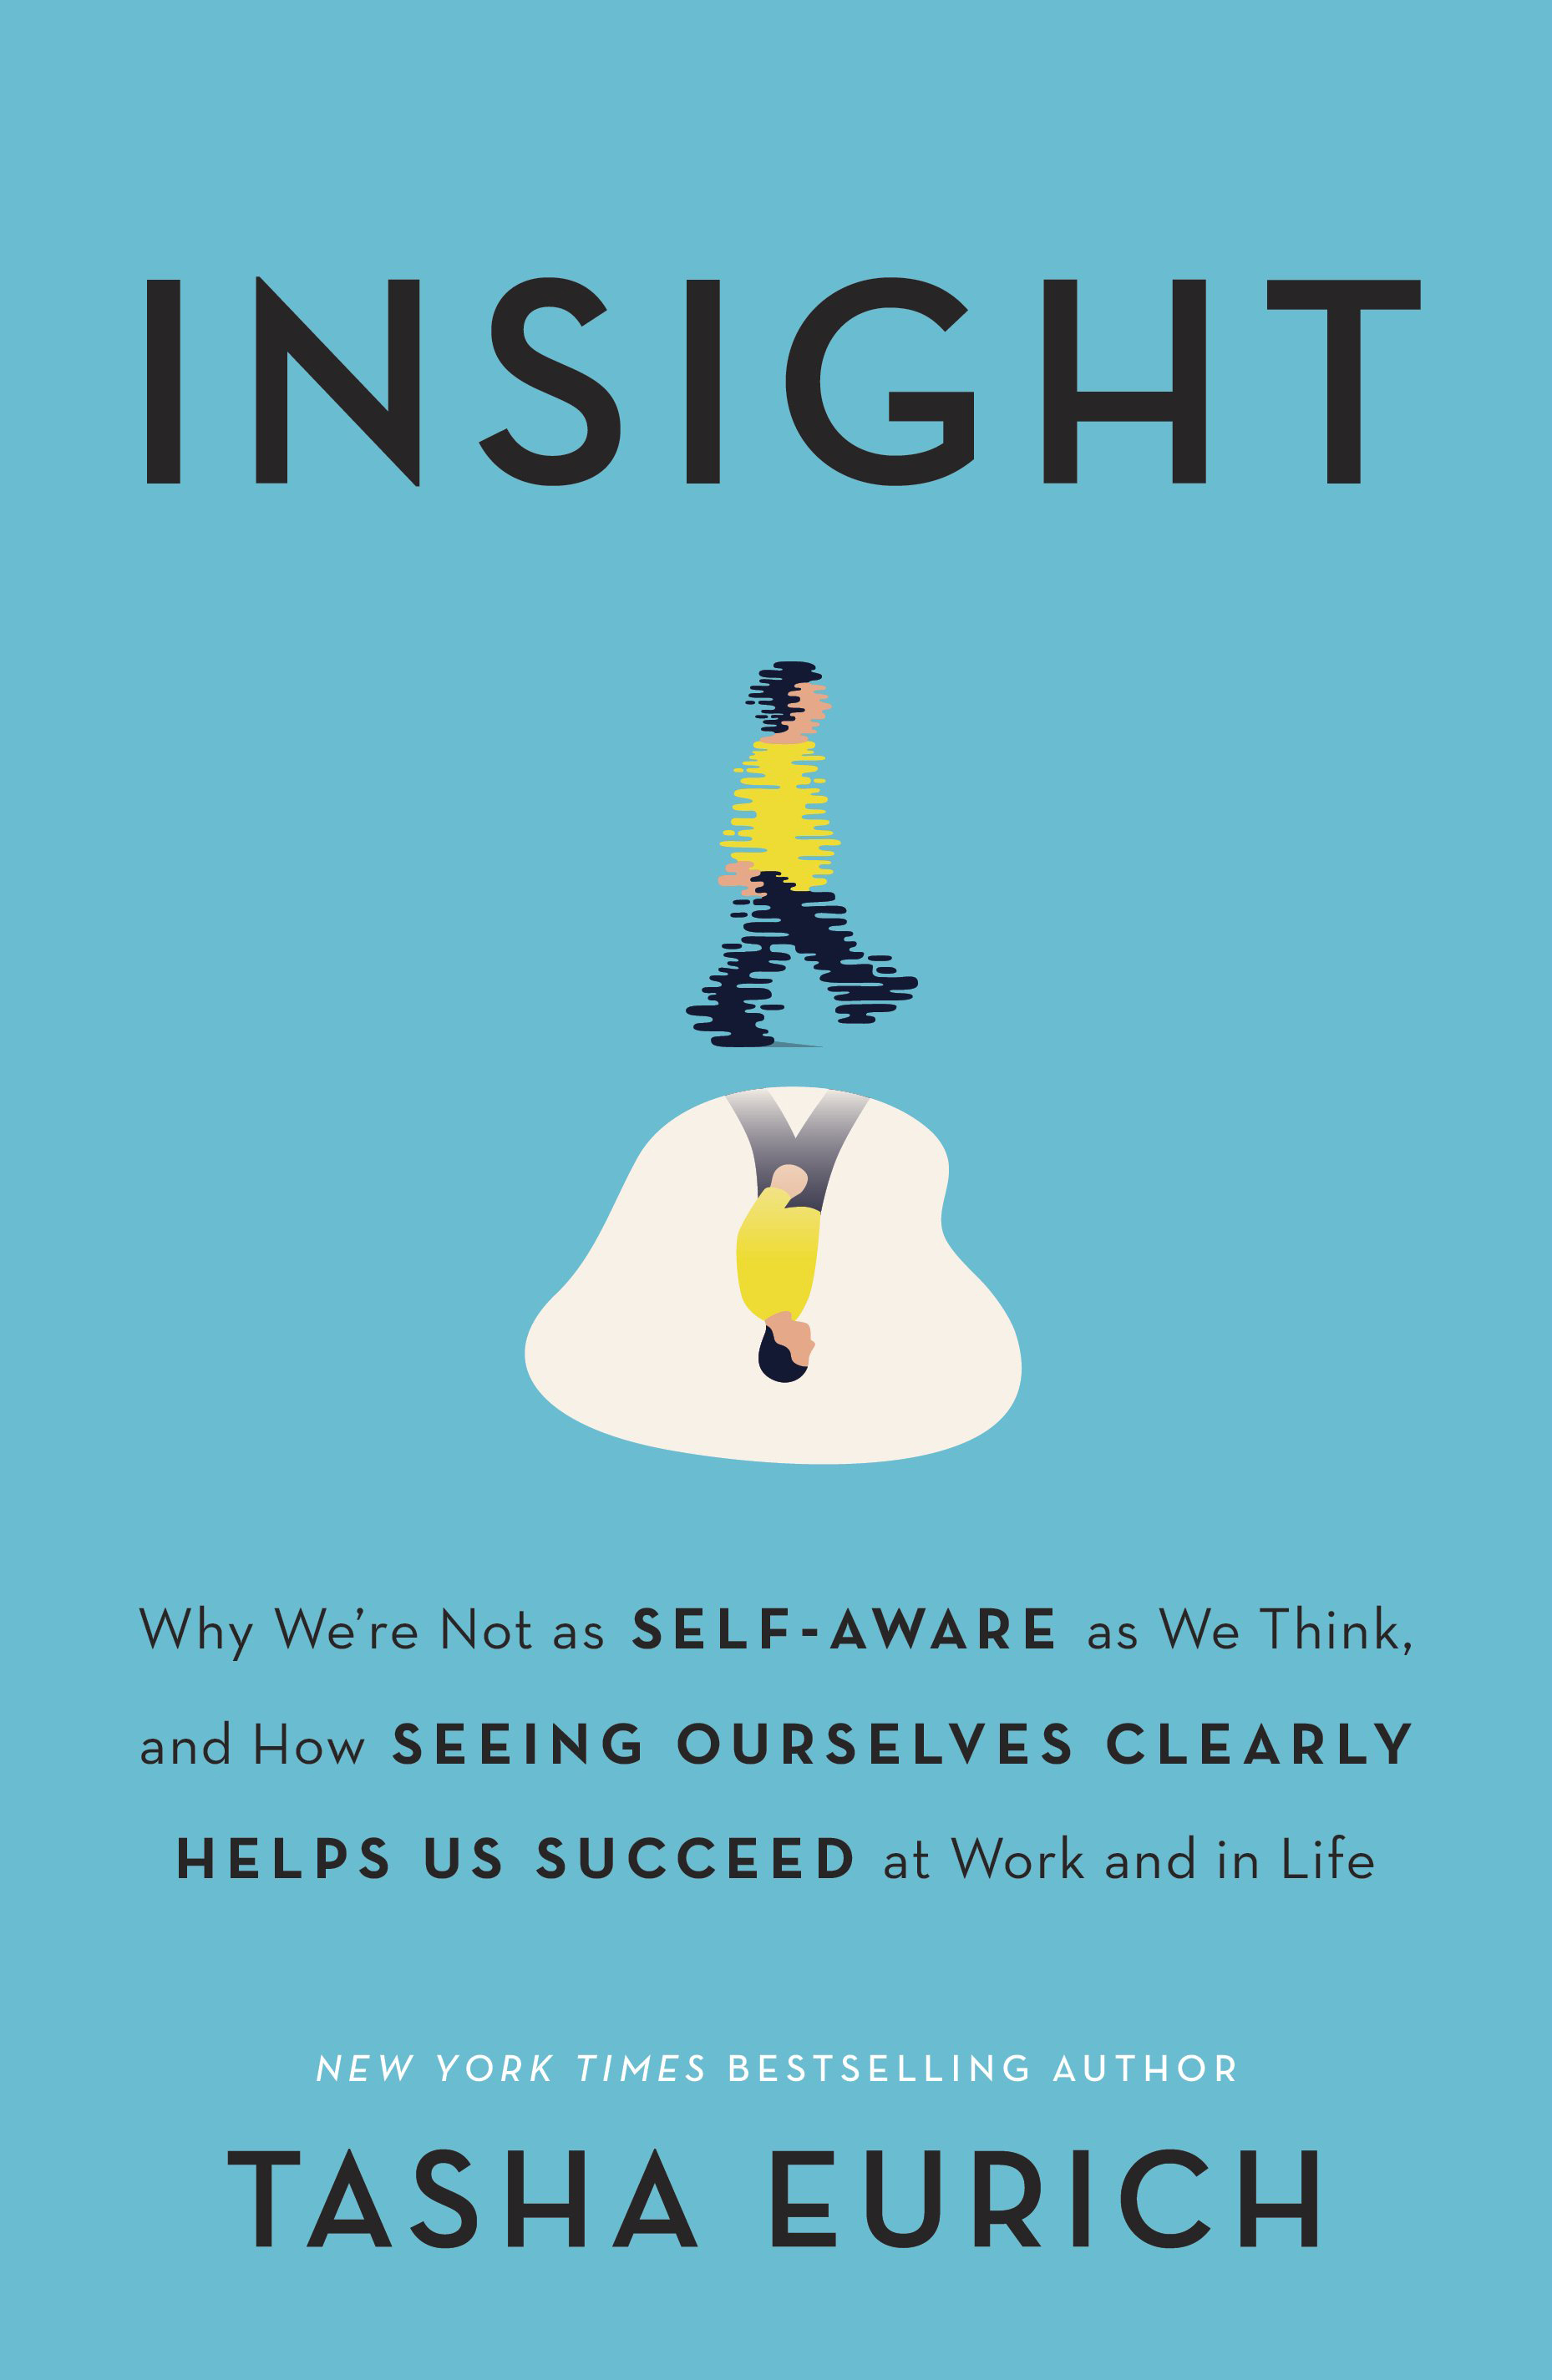 Insight by Tasha Eurich | Book Review